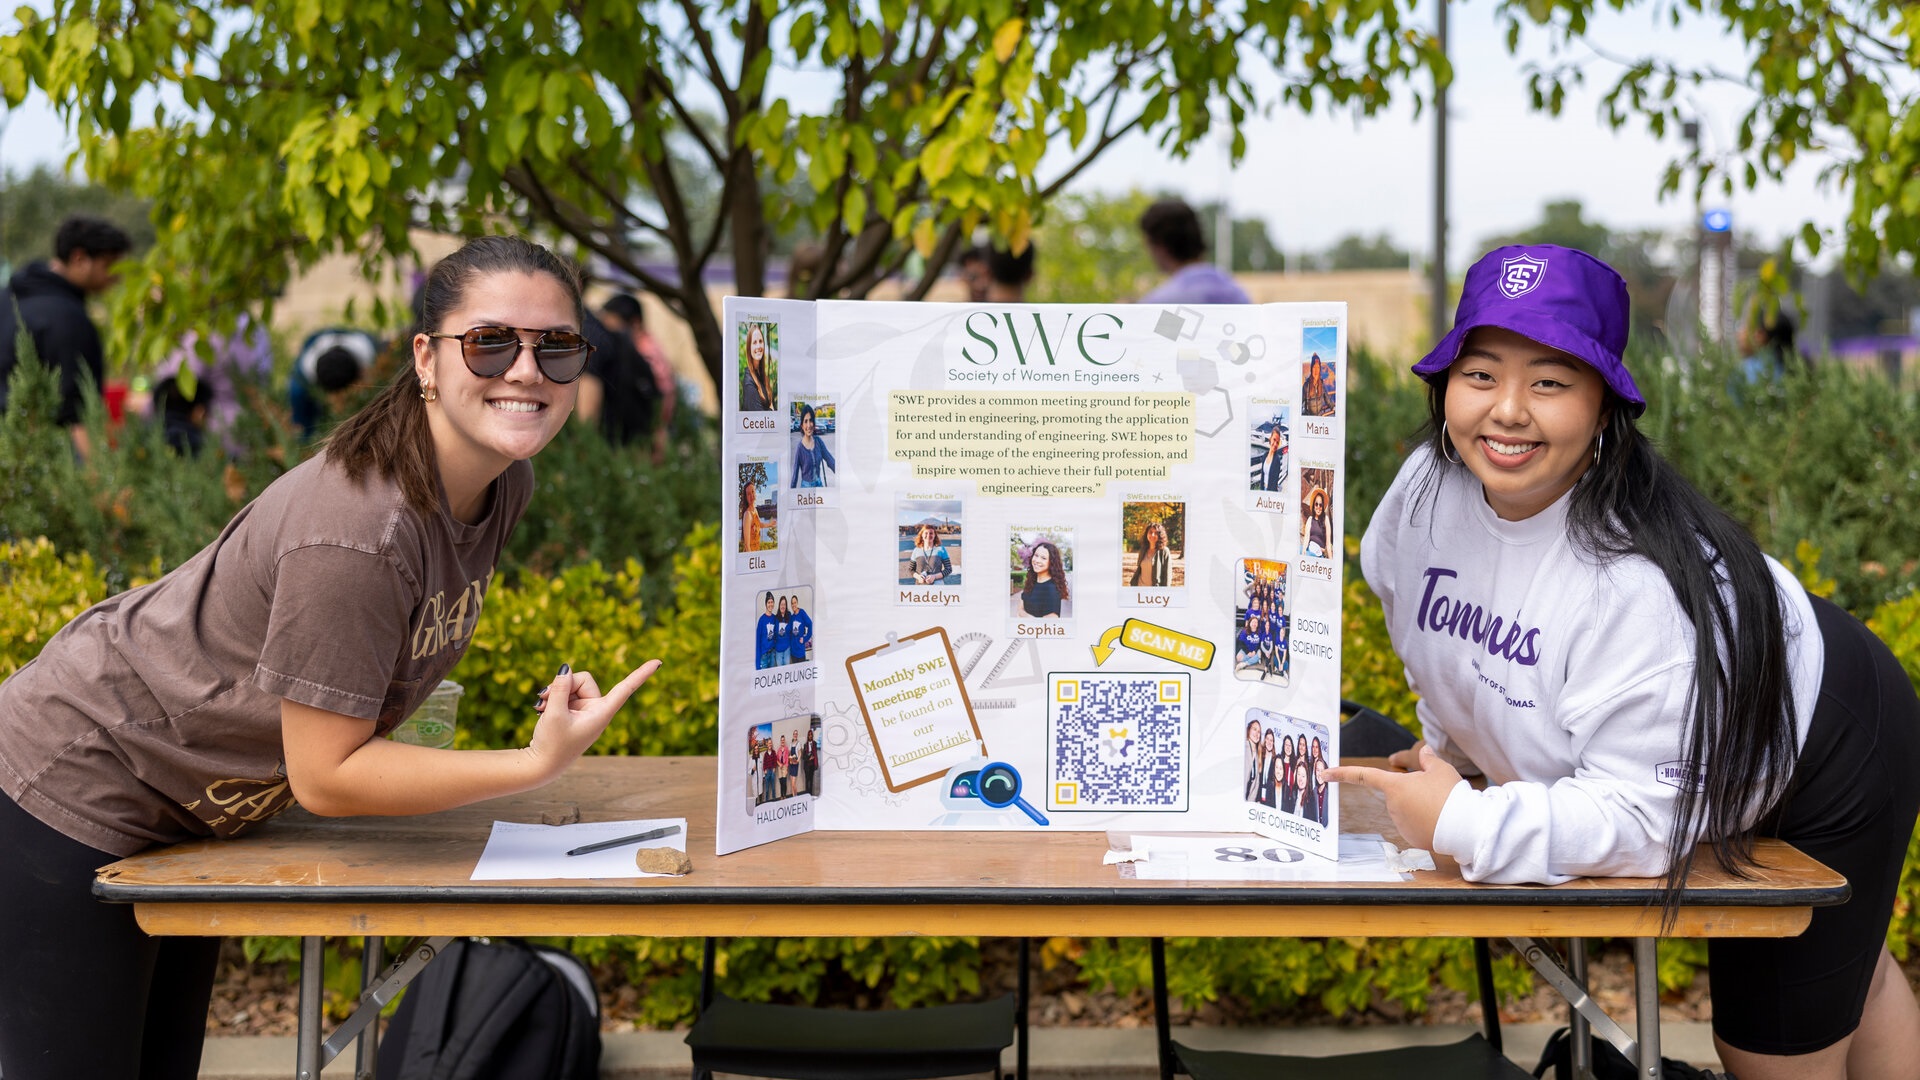 St. Thomas Engineering students pose next to a poster promoting the Society of Women Engineers.